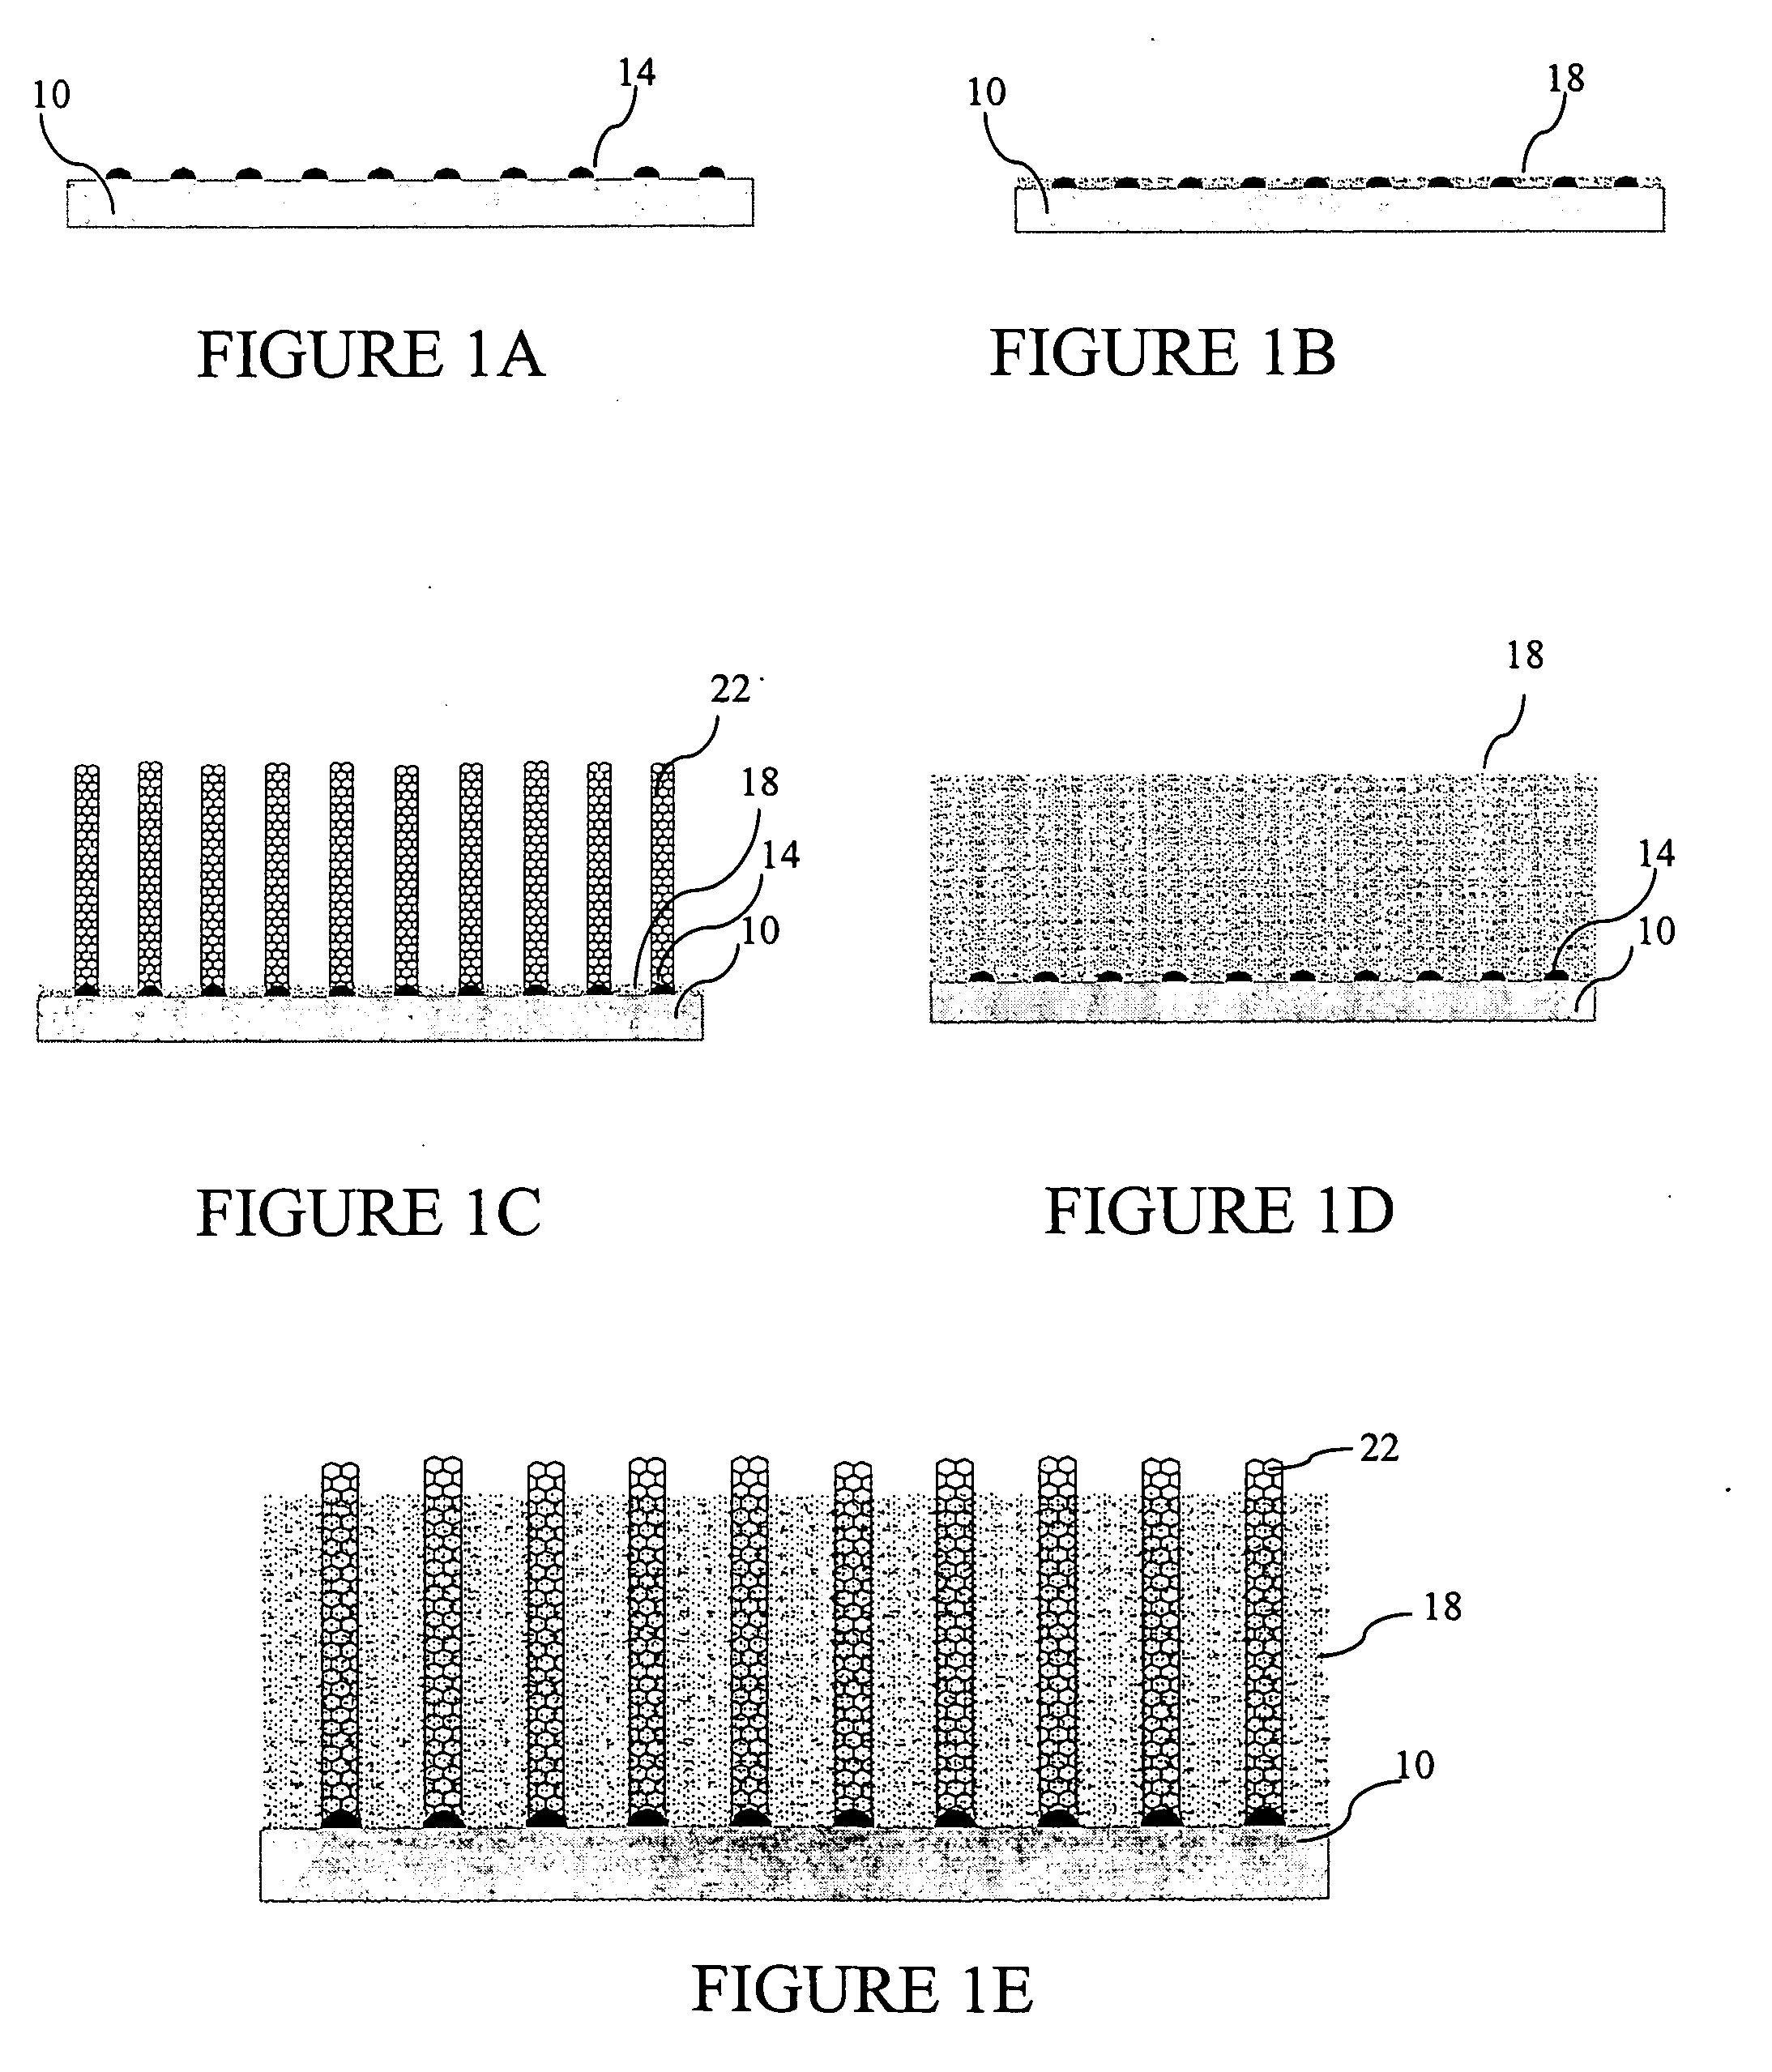 System and method for controlling hydrogen elimination during carbon nanotube synthesis from hydrocarbons